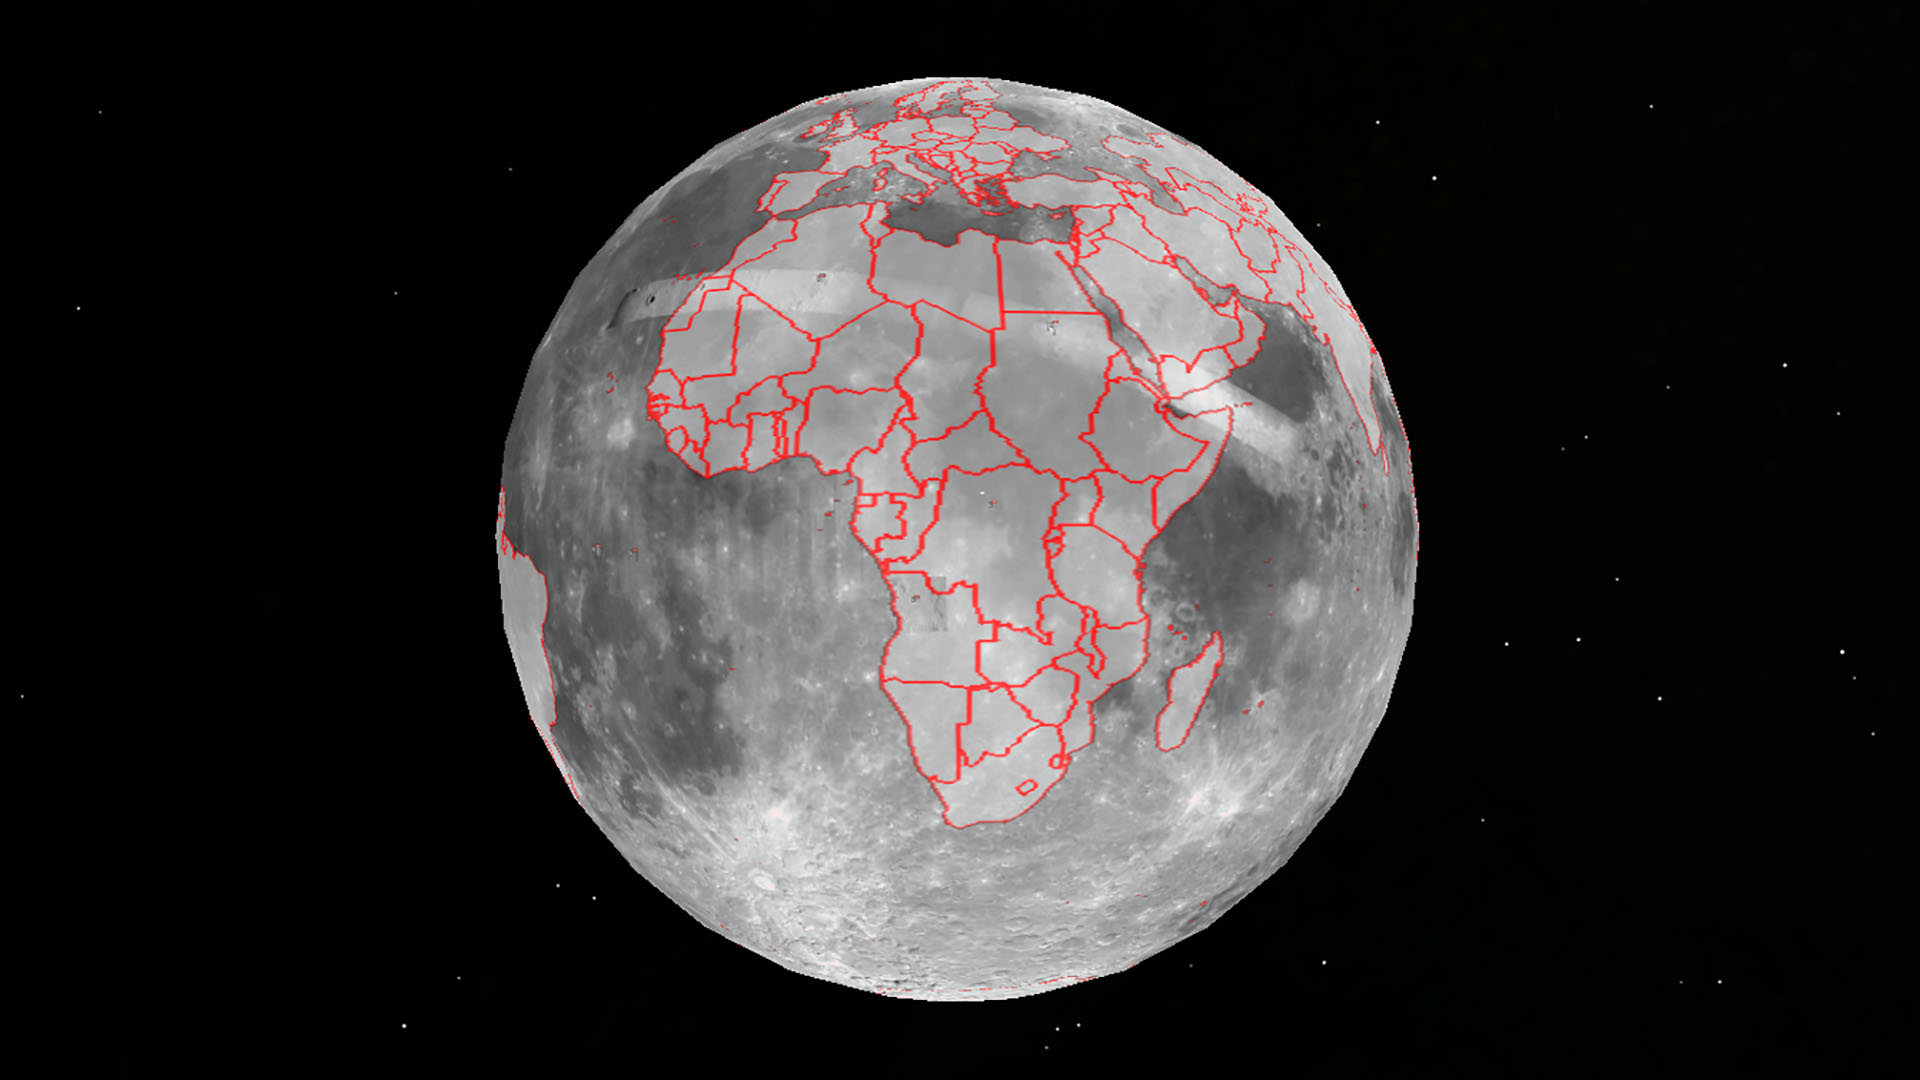 The continent of Africa projected onto the Moon in Google Earth 7.1.2.2041. The Apollo 11 landing site is visible in the north of the Democratic Republic of Congo, roughly image center.